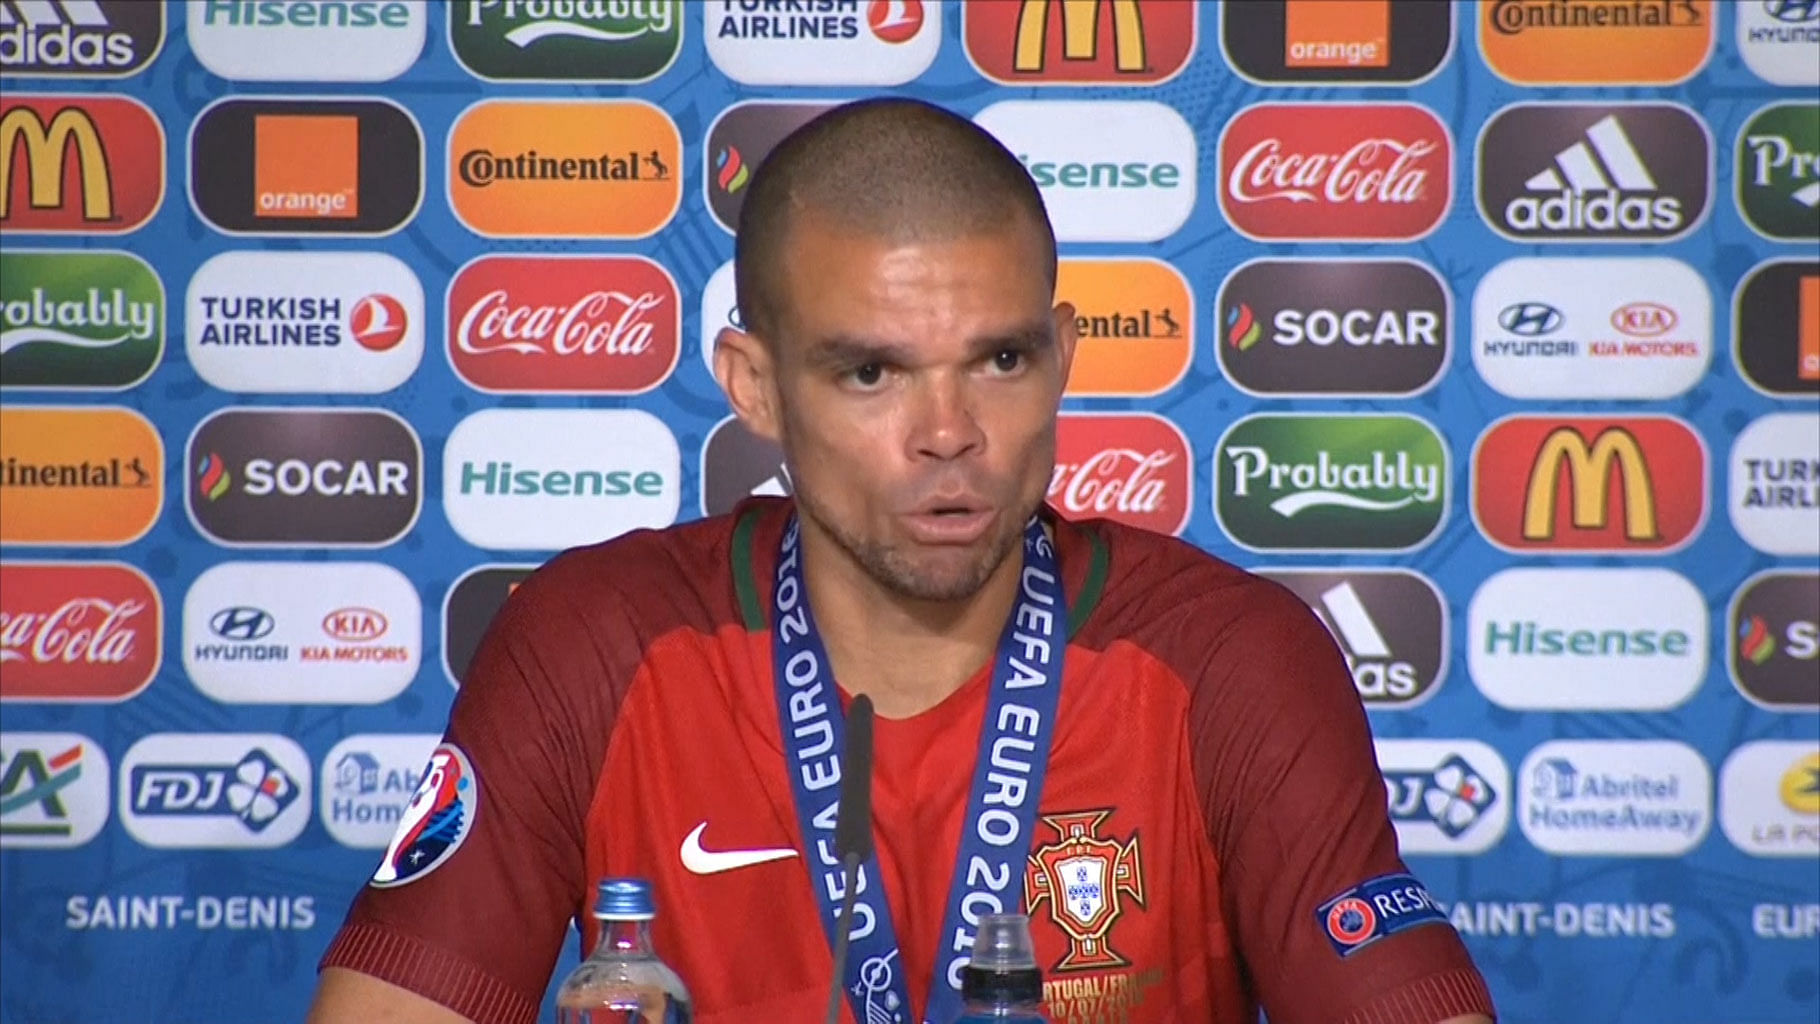 Portugal’s Pepe speaks to the media after Portugal won Euro 2016. (Photo: AP/SNTV)